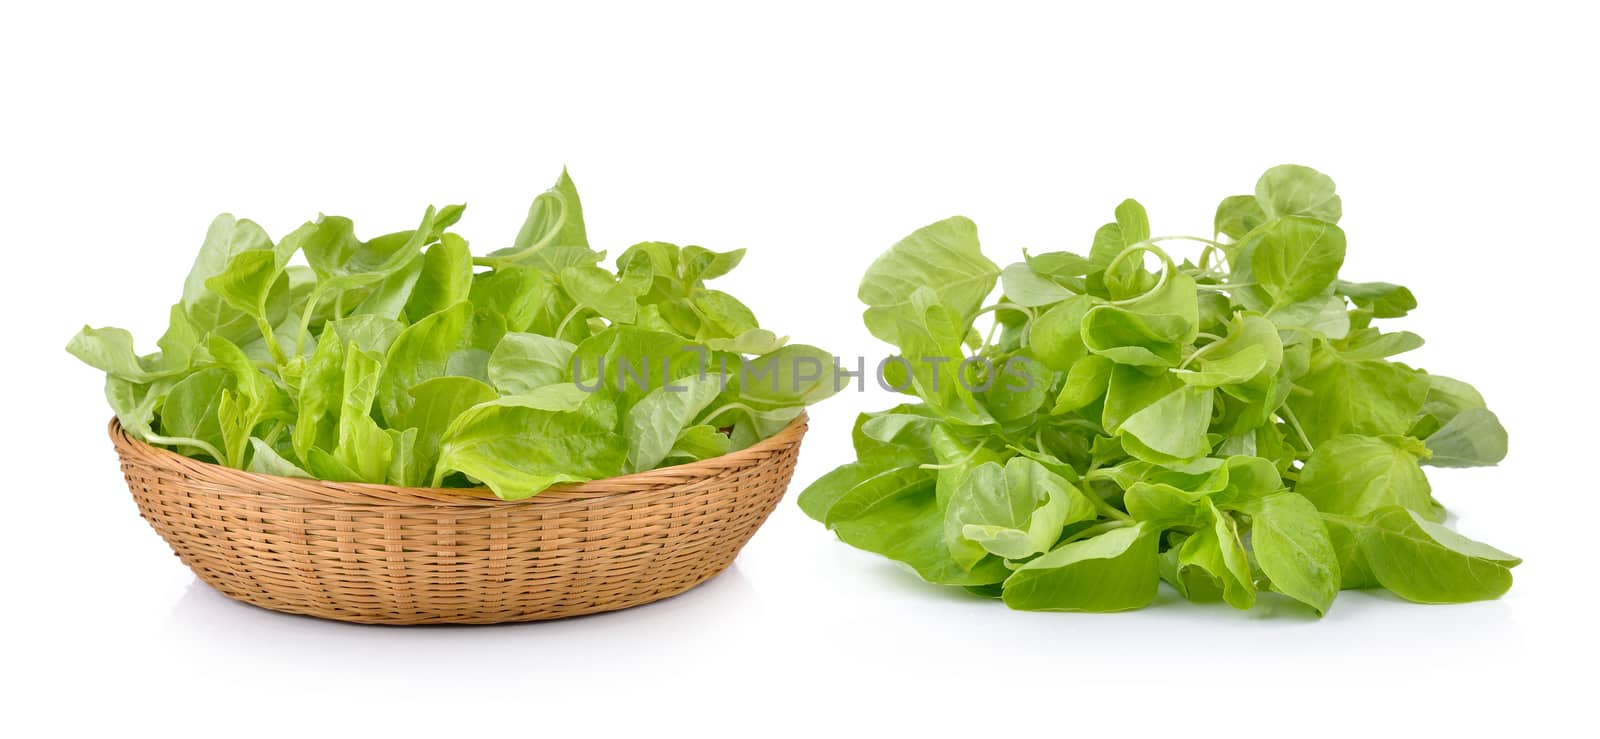 spinach on white background by sommai